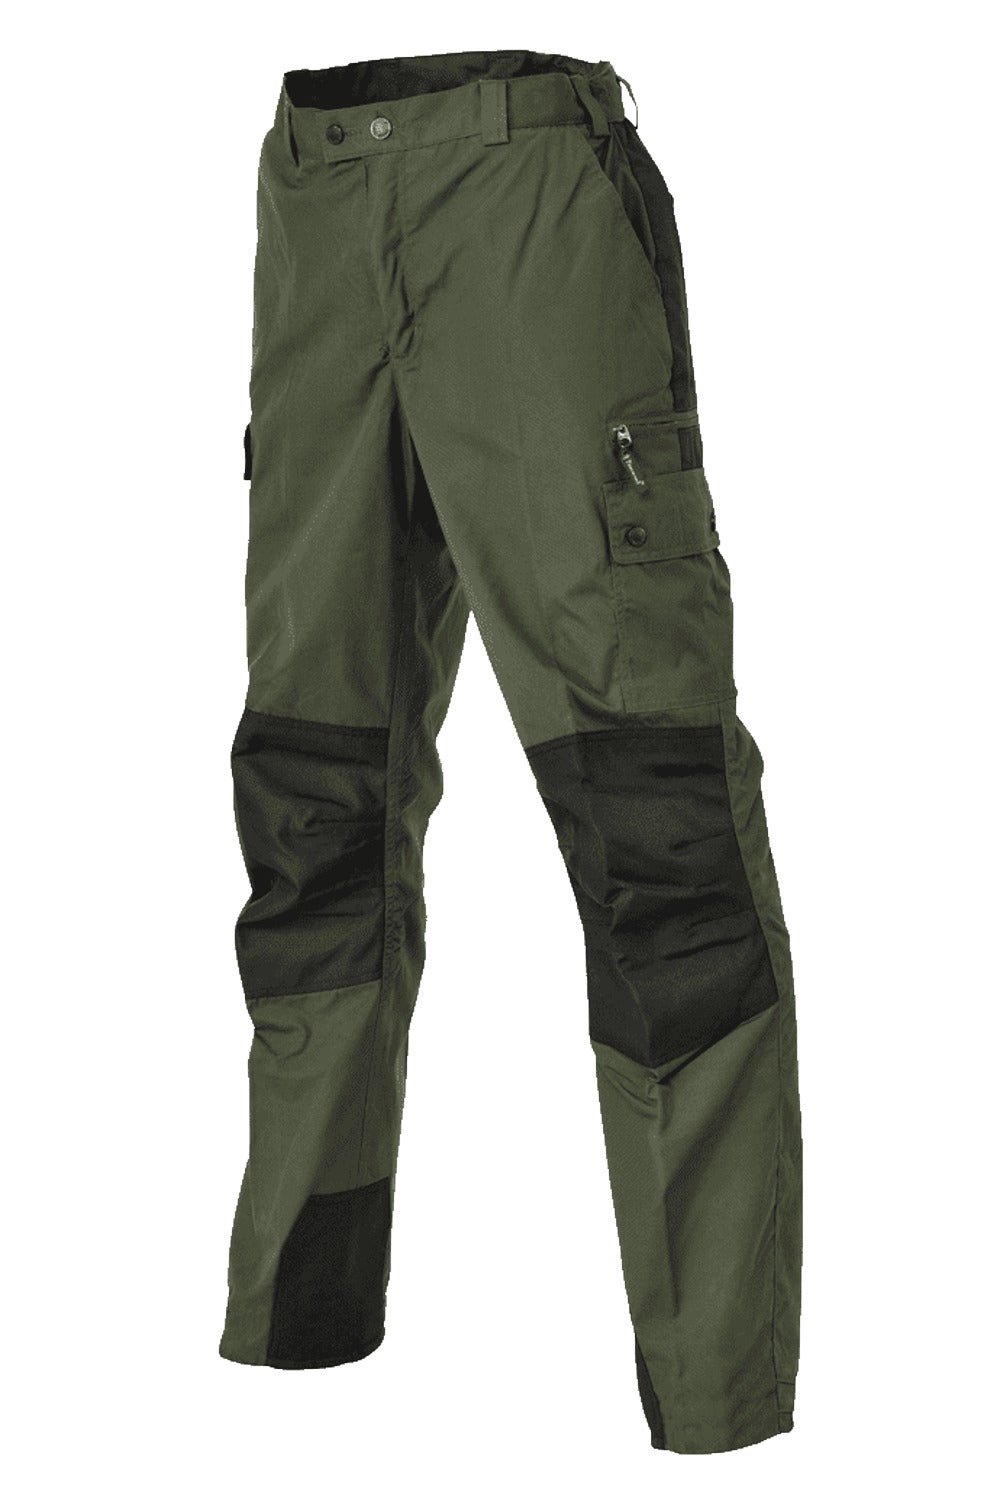 Pinewood Childrens Lappland Trousers in Mid Green Black